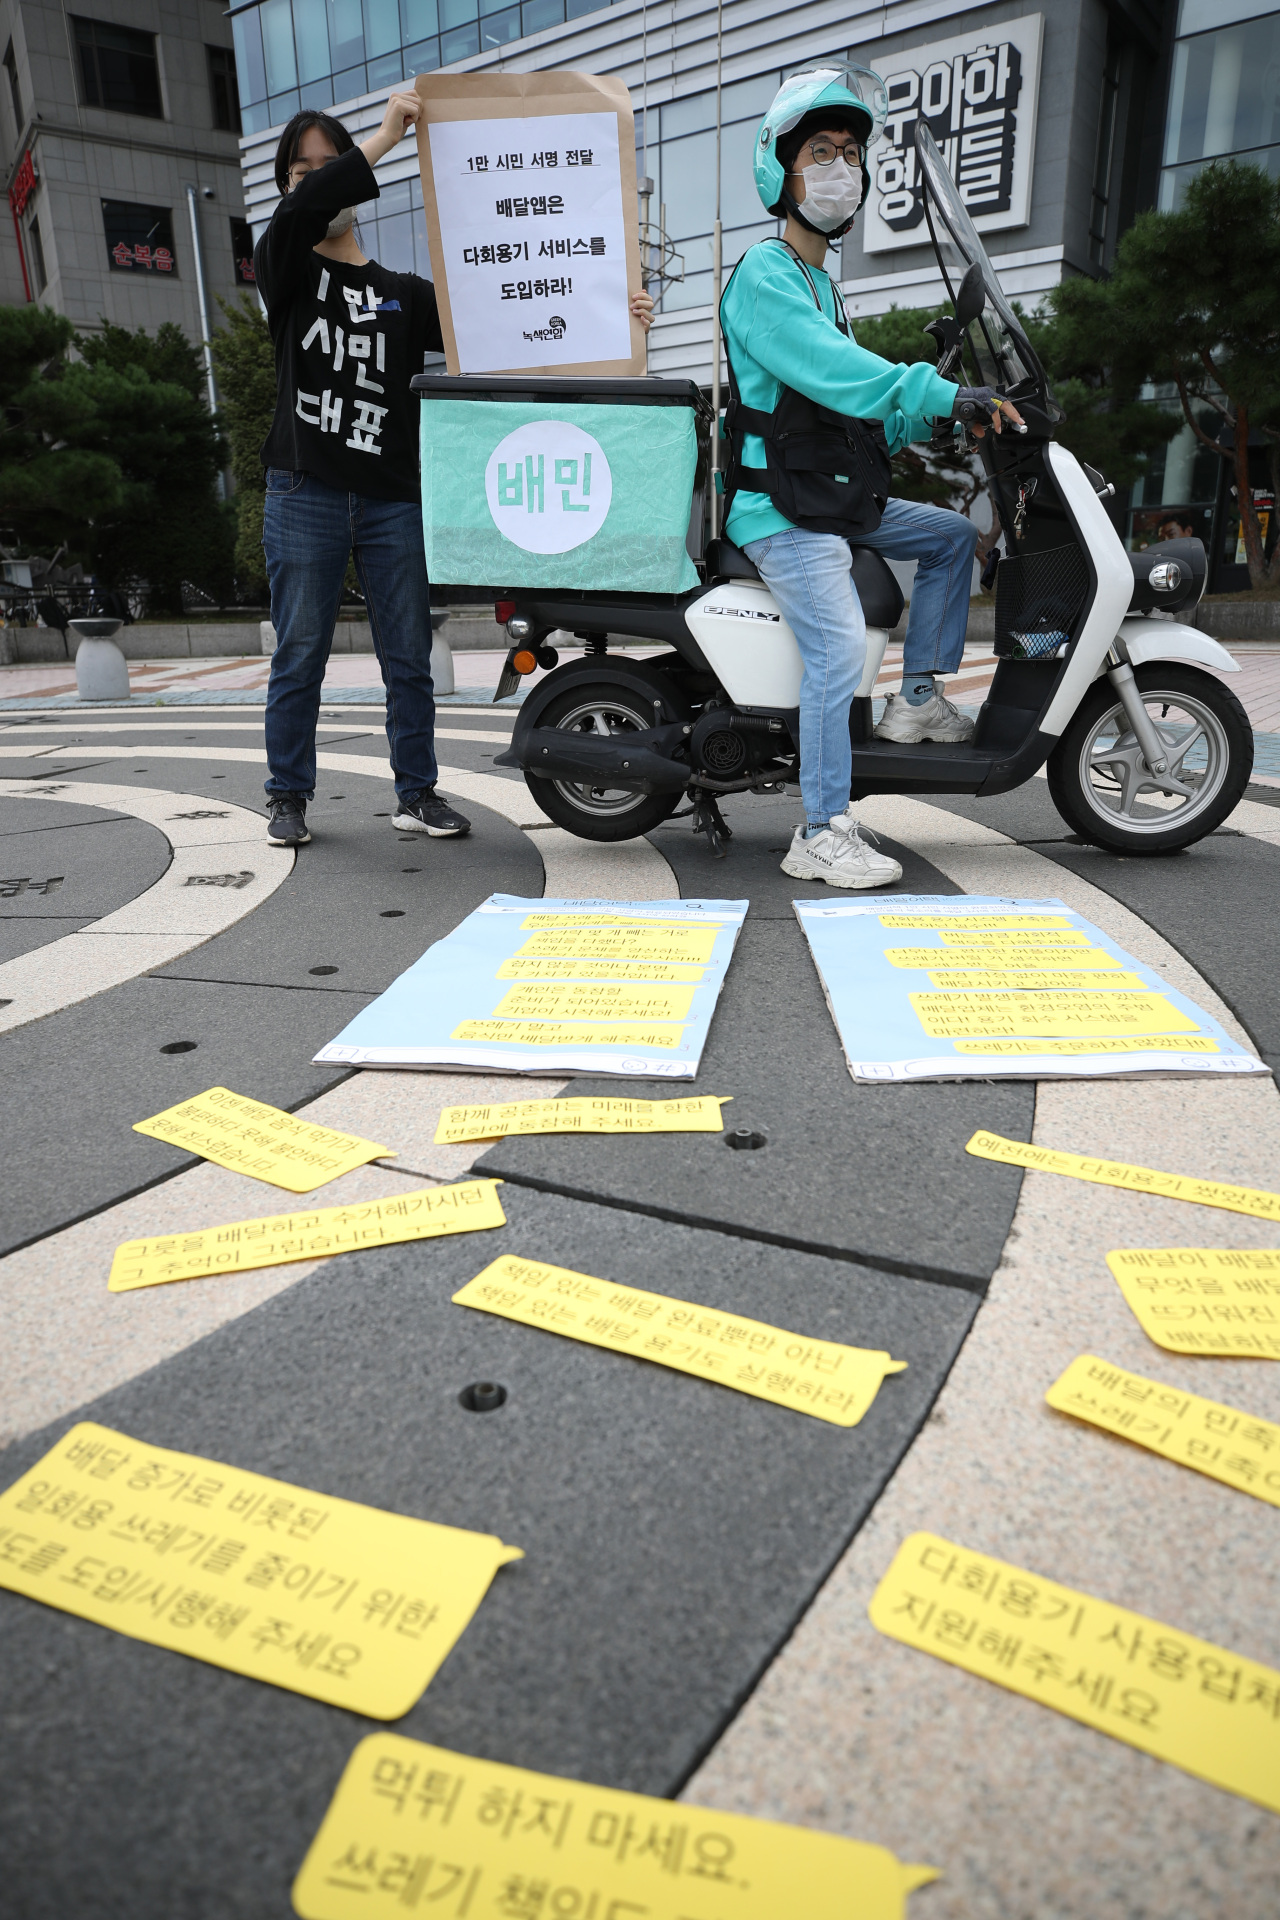 Green Korea and Riders Union hold press conference to call on food delivery platforms to introduce the option of reusable containers in front of Baedal Minjok headquarters in Seoul on Thursday. (Yonhap)